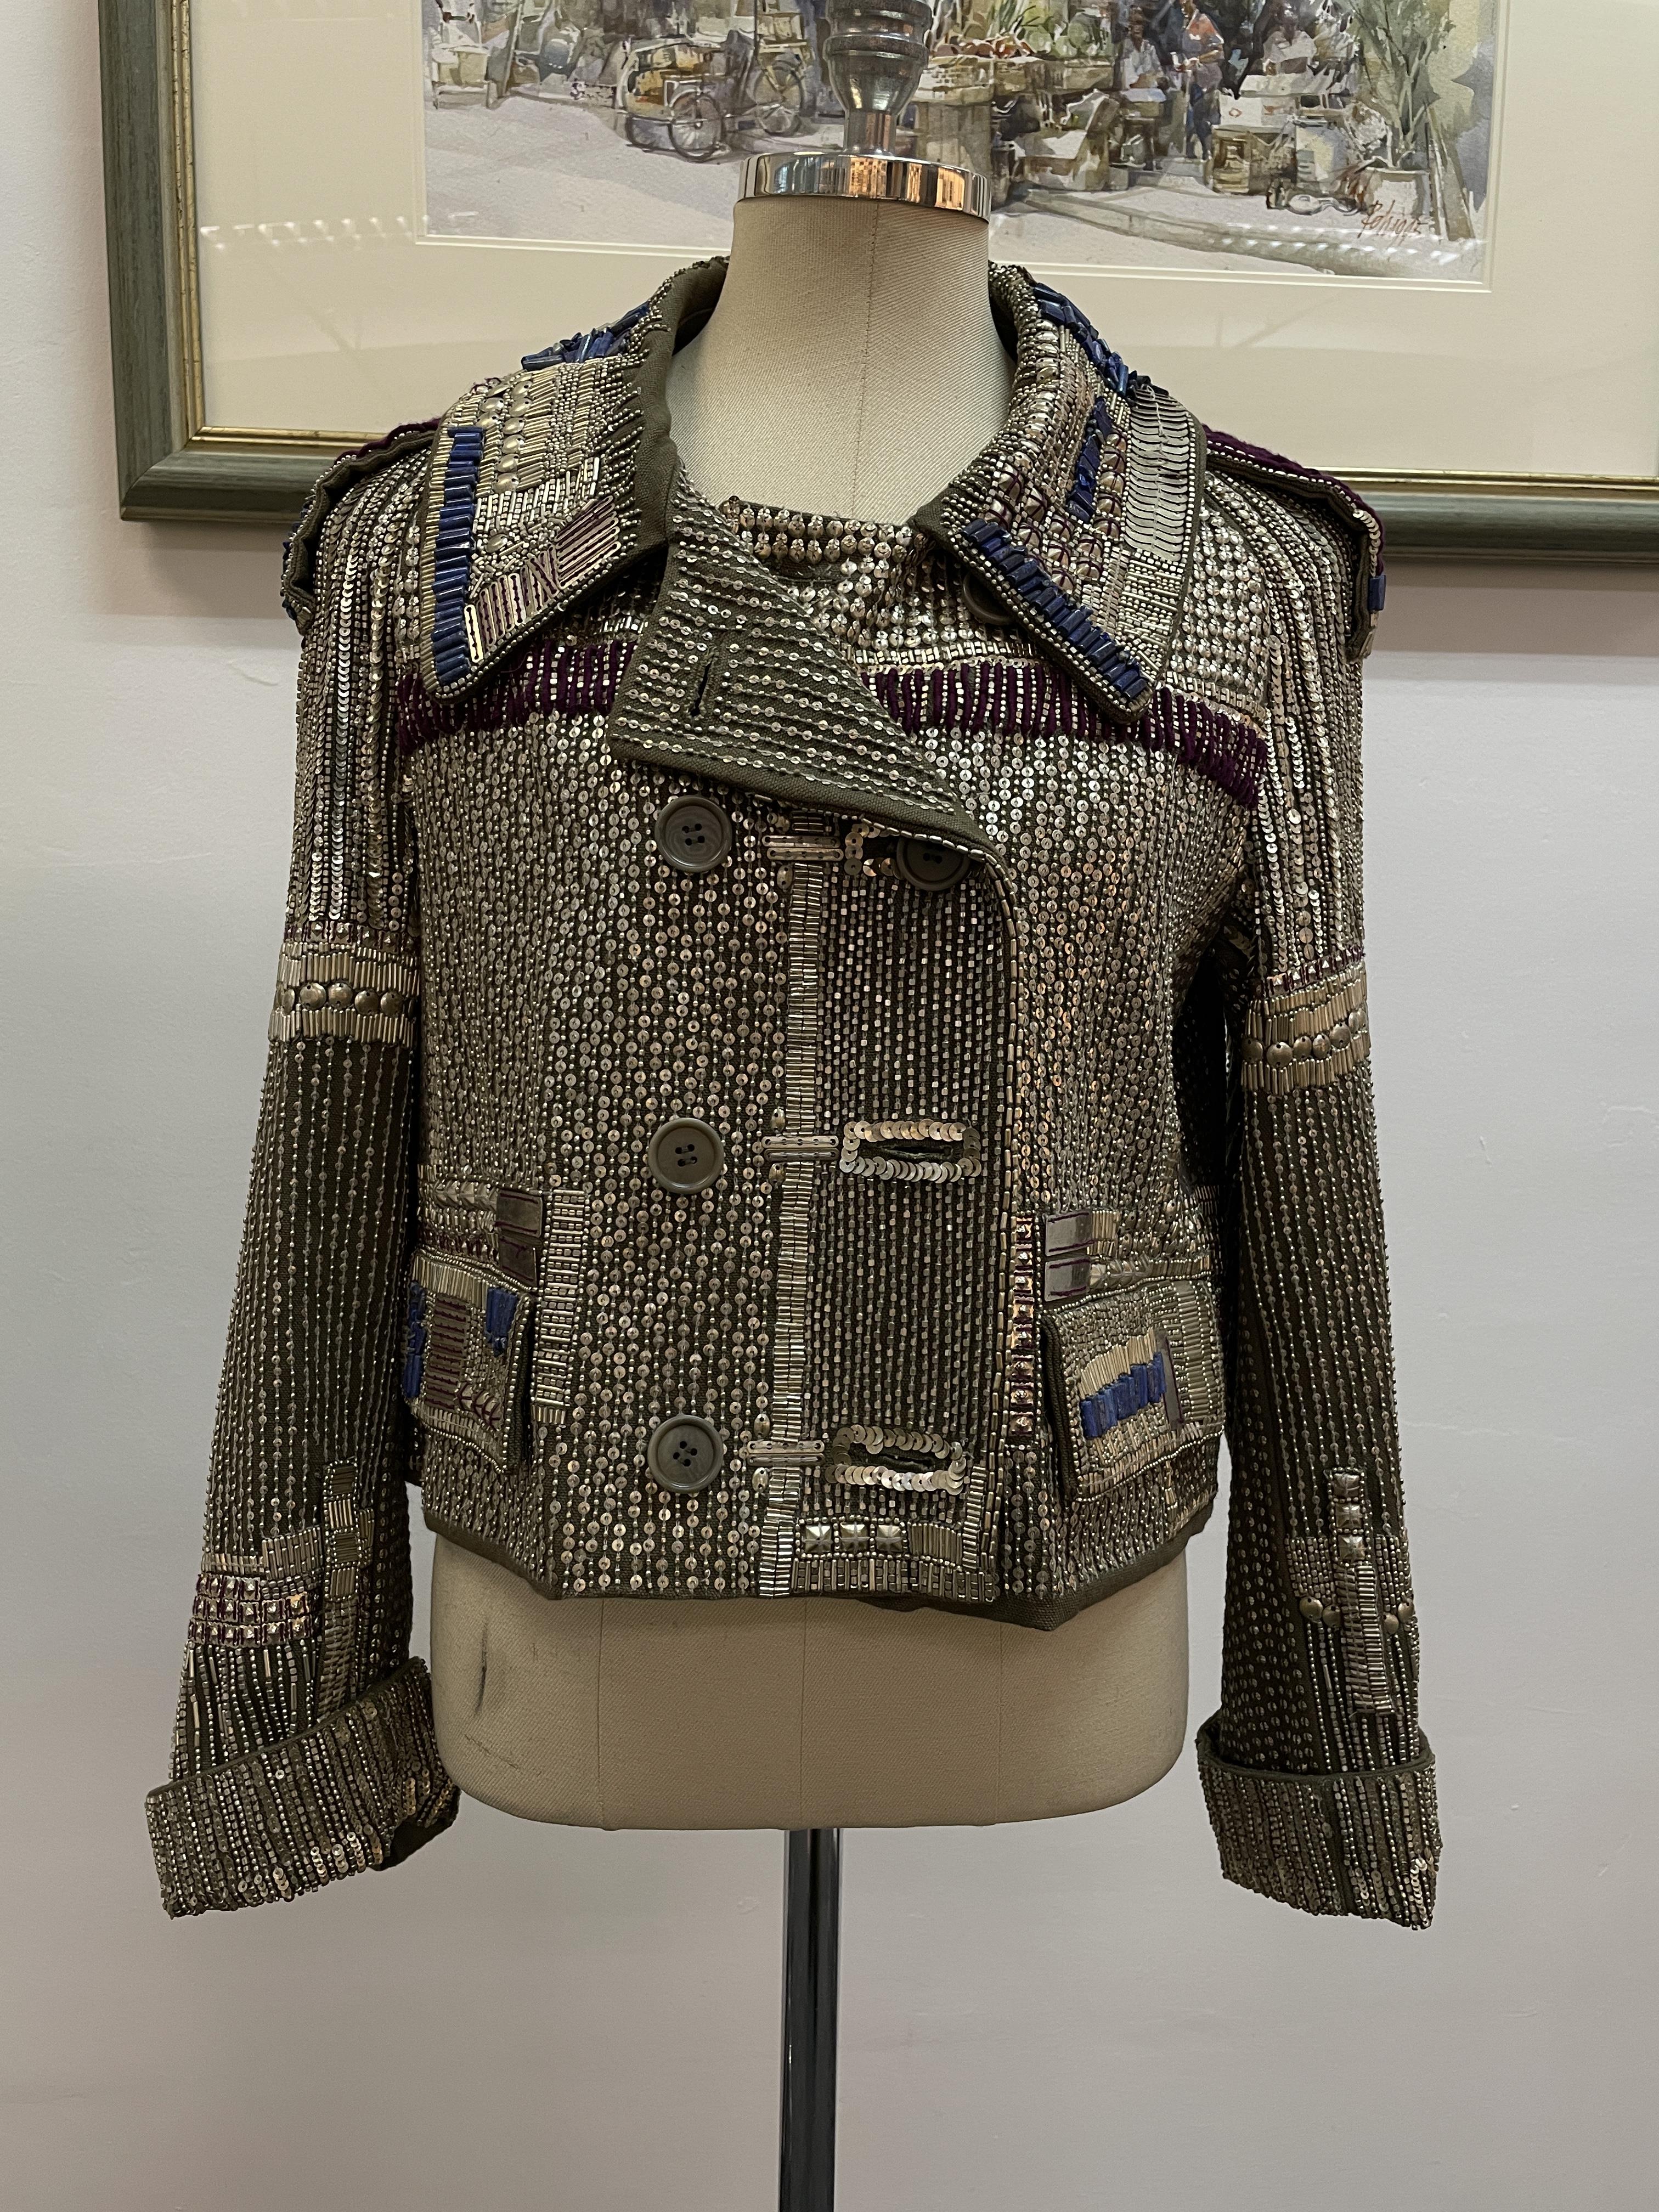 A DRIES VAN NOTEN EMBELLISHED MILITARY JACKET - Image 6 of 13